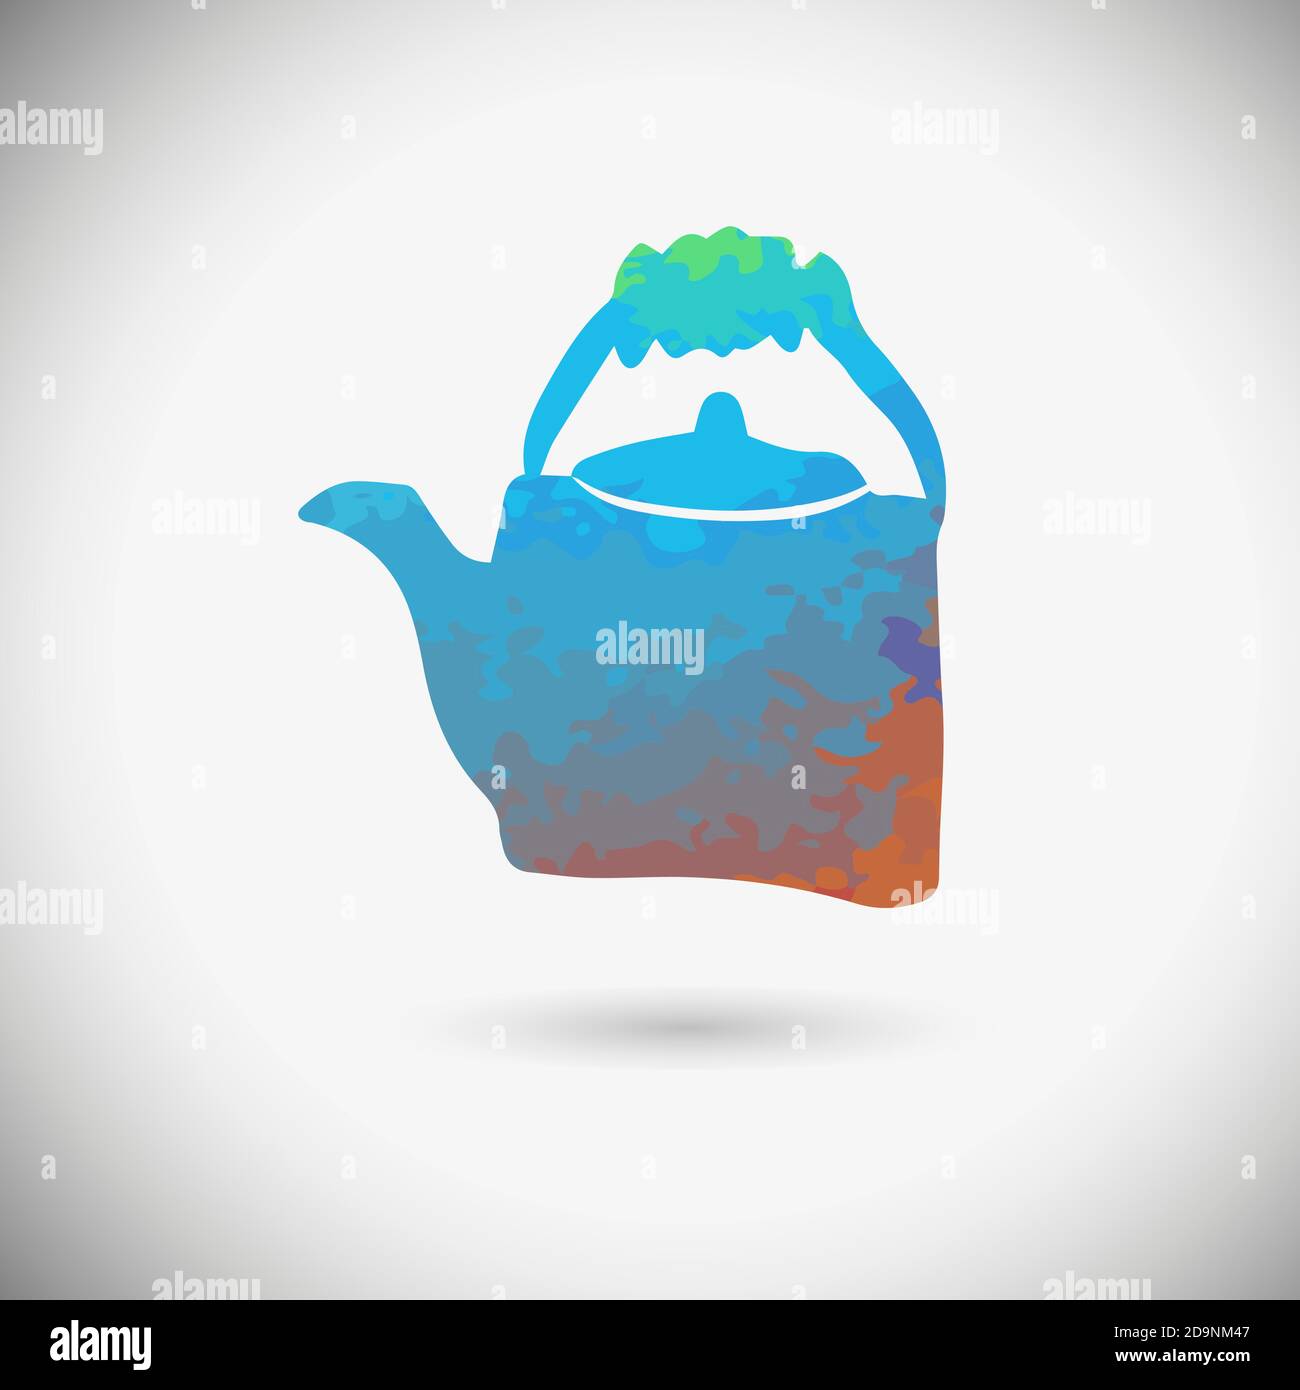 https://c8.alamy.com/comp/2D9NM47/kitchenware-the-teapot-is-multicolored-vector-illustration-logo-label-tattoo-2D9NM47.jpg